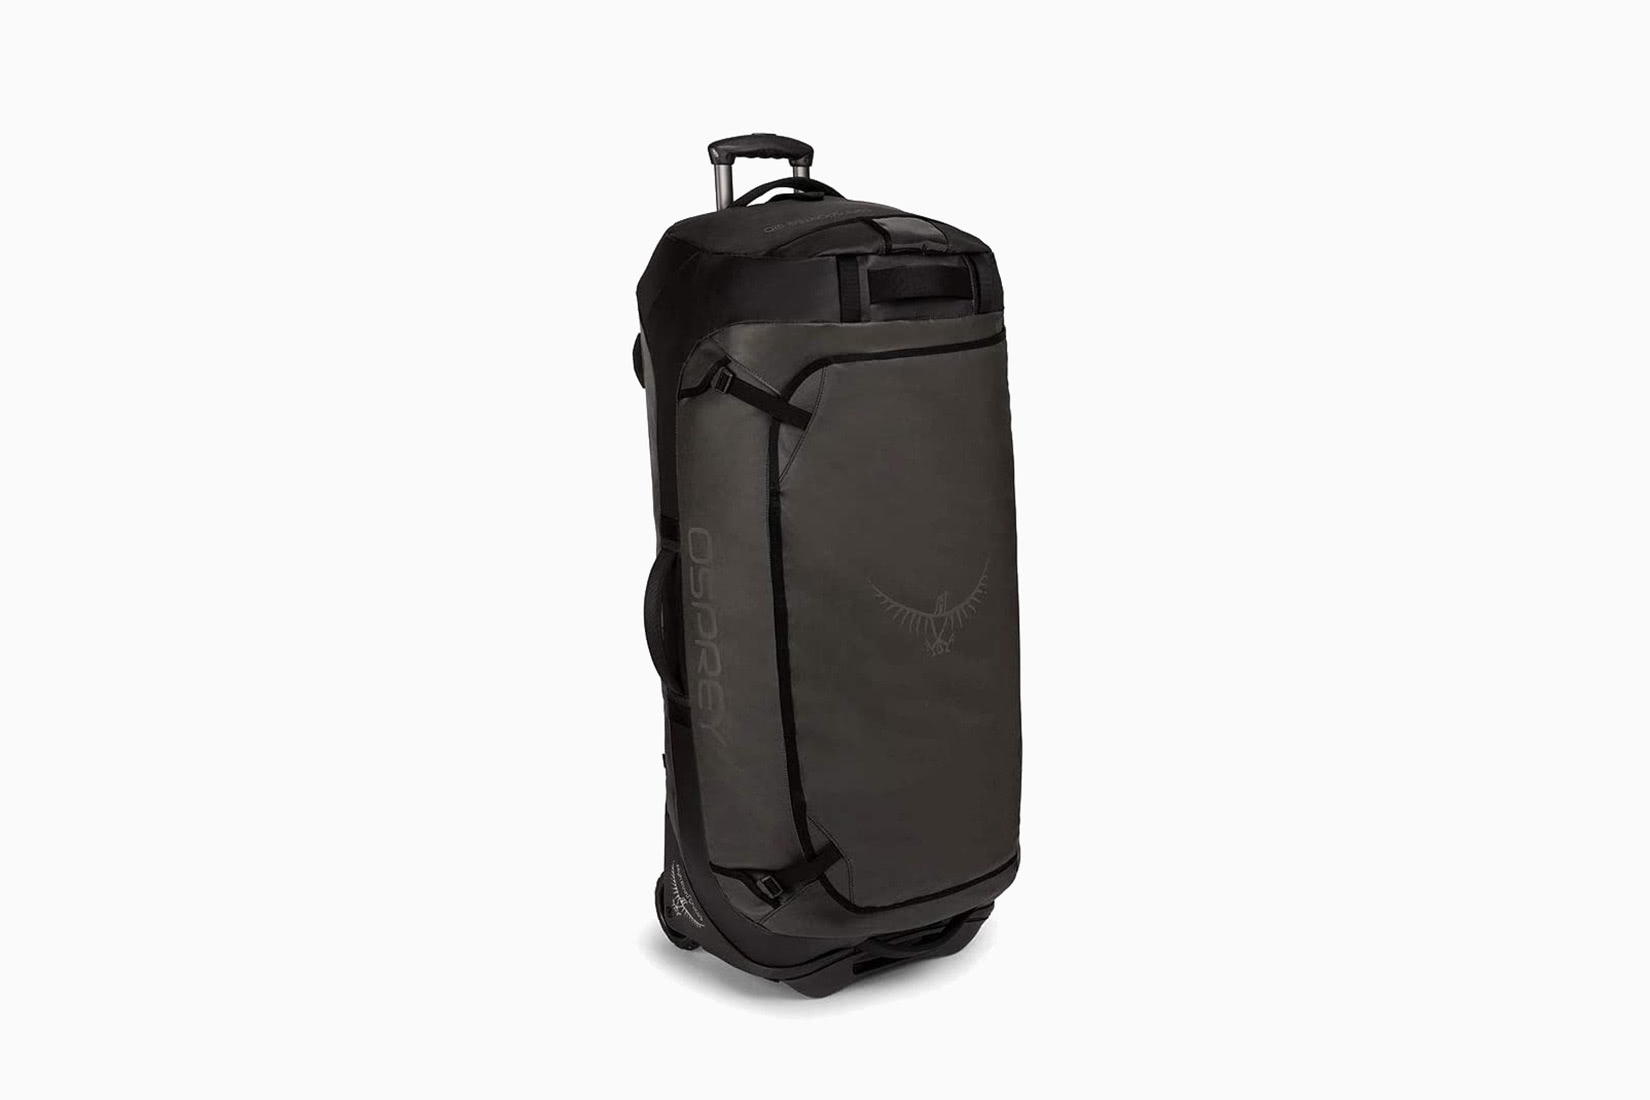 meilleures marques de bagages valise duffel Osprey - Luxe Digital